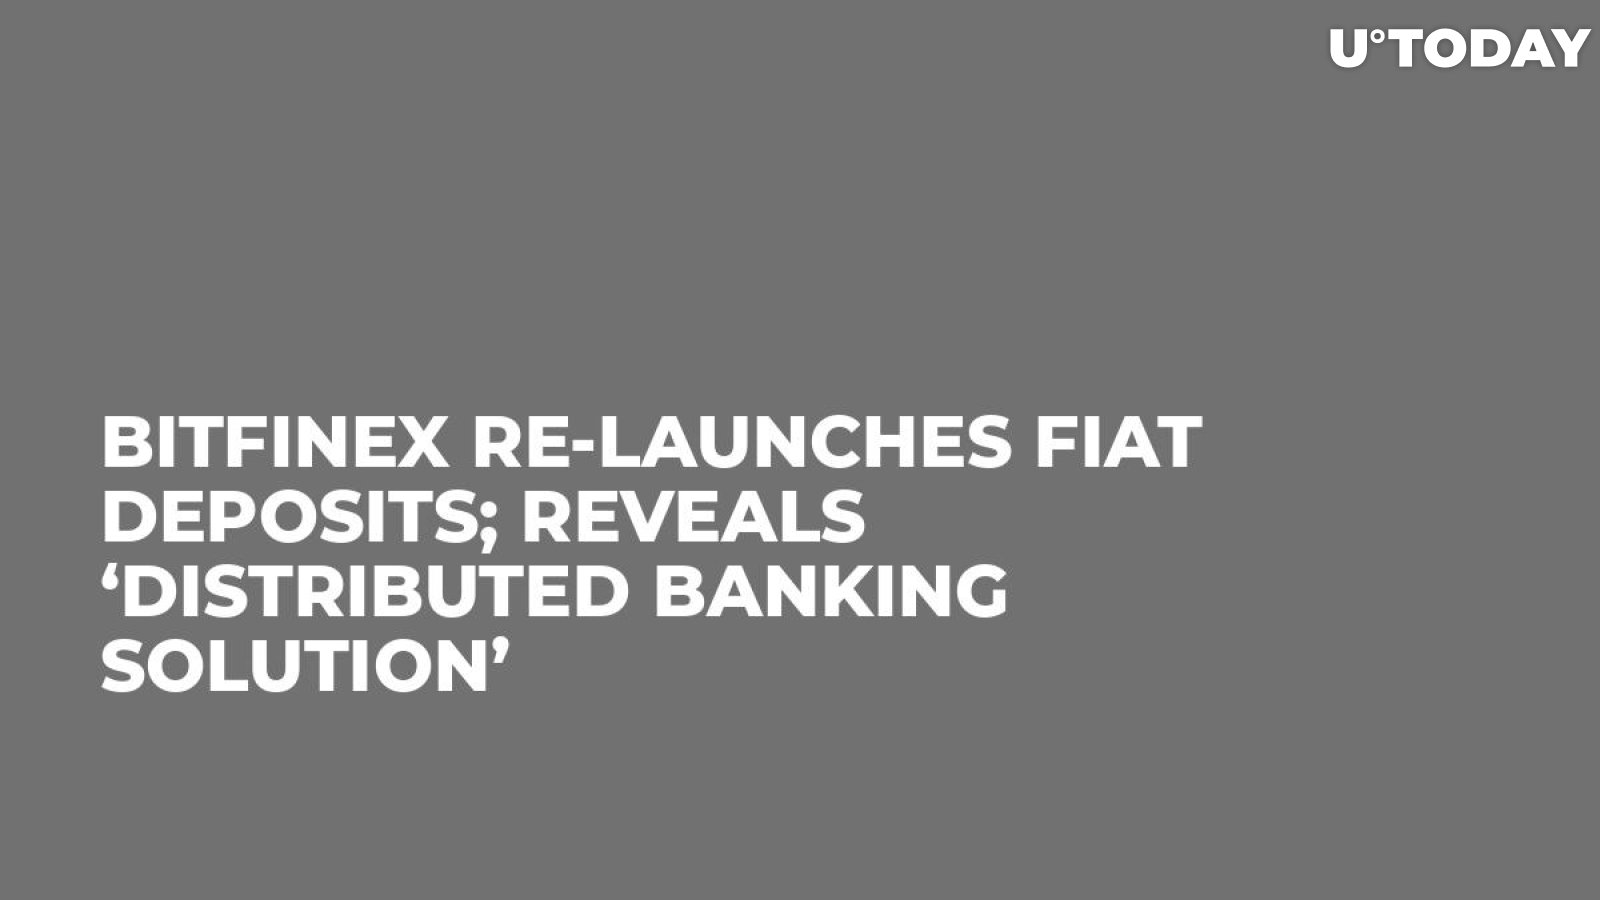 Bitfinex Re-Launches Fiat Deposits; Reveals ‘Distributed Banking Solution’